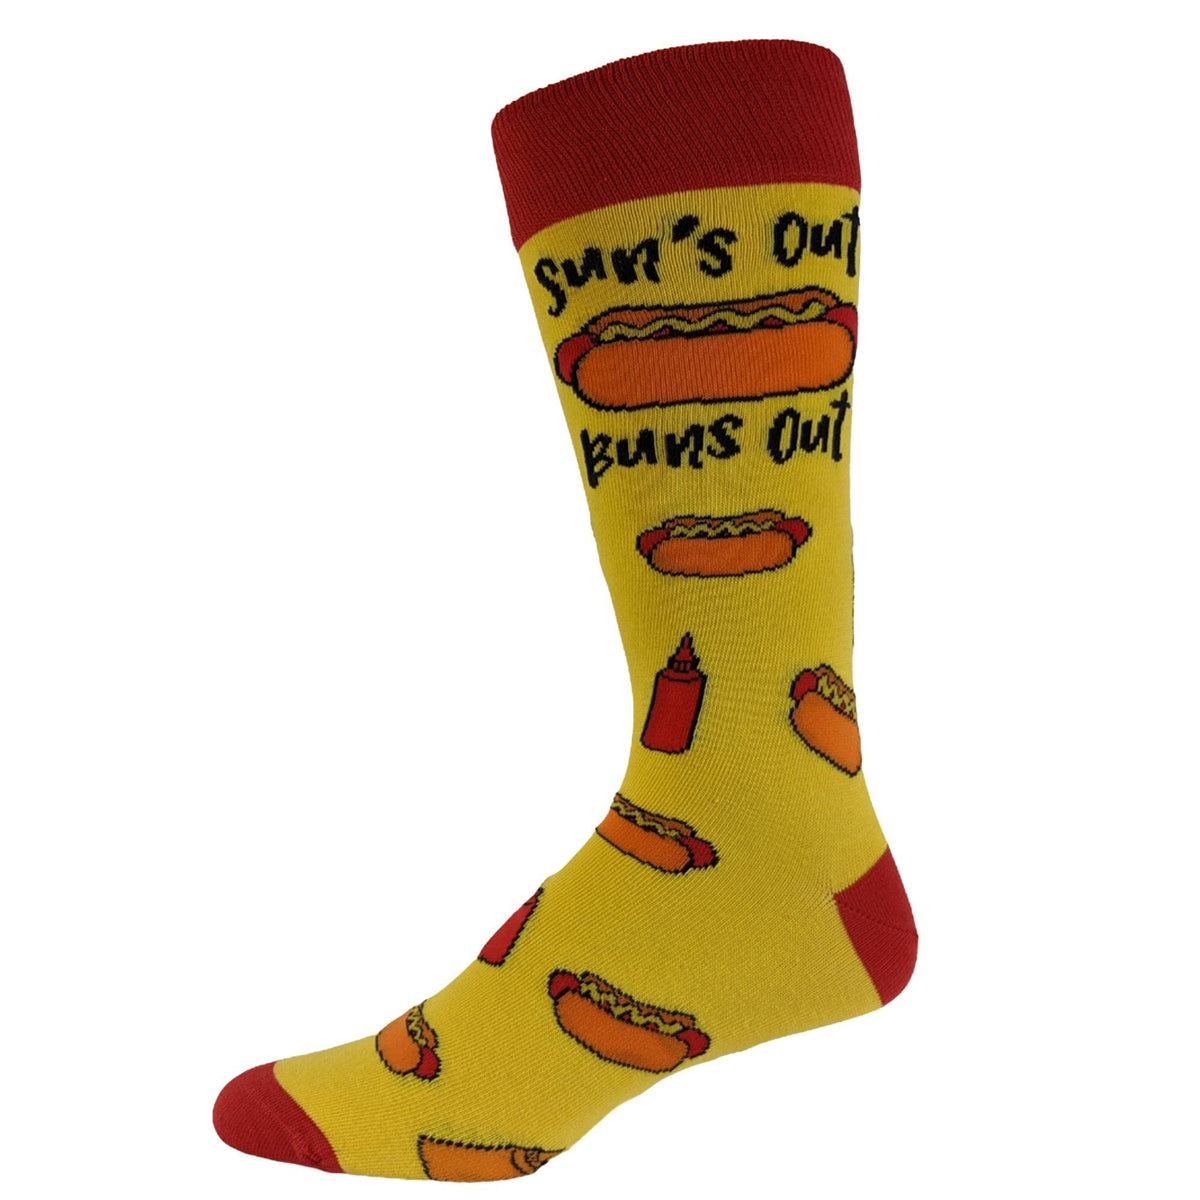 Mens Suns Out Buns Out Socks  -  Crazy Dog T-Shirts